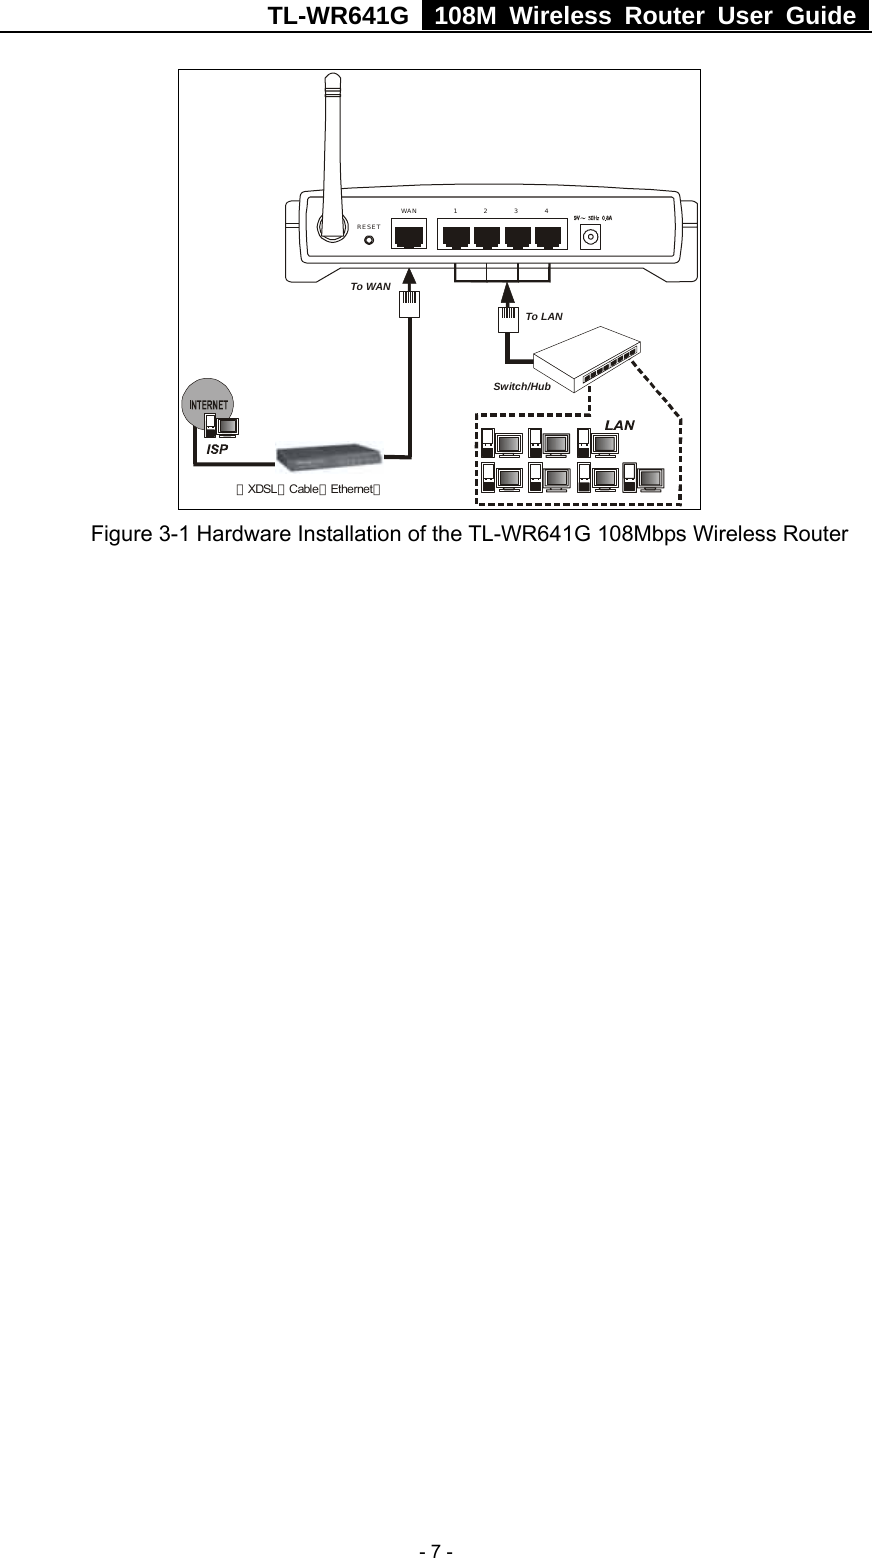 TL-WR641G   108M Wireless Router User Guide   - 7 -To LANSwitch/Hub4321WANTo WANRESET（）XDSL Cable Ethernet、、 Figure 3-1 Hardware Installation of the TL-WR641G 108Mbps Wireless Router 